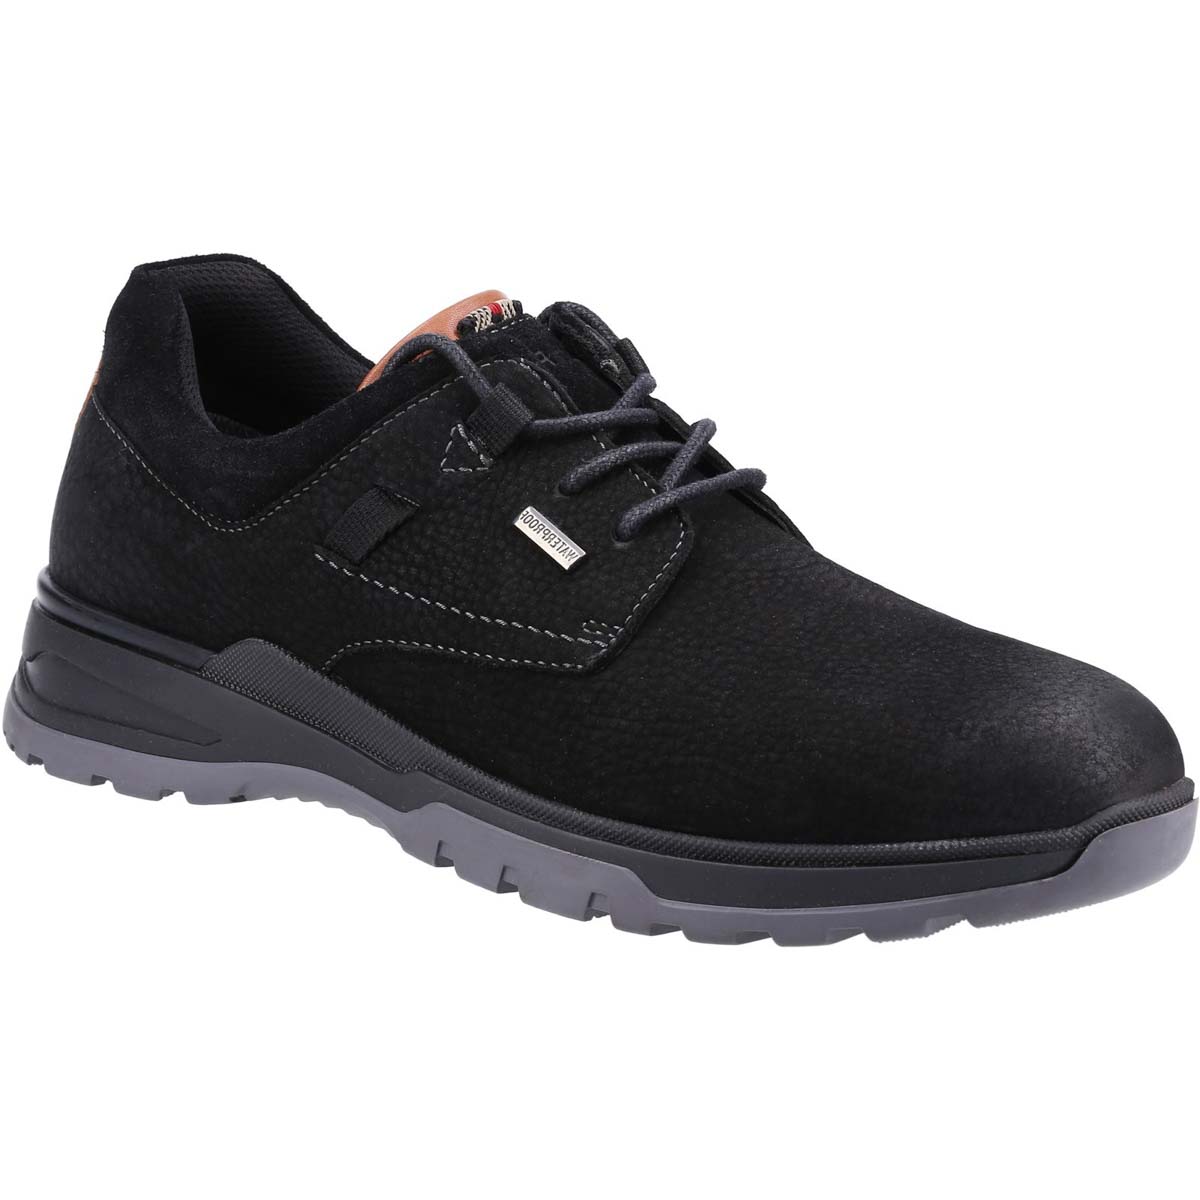 Hush Puppies Pele Lace Up Black nubuck Mens comfort shoes 35665-66533 in a Plain Nubuck Leather in Size 12